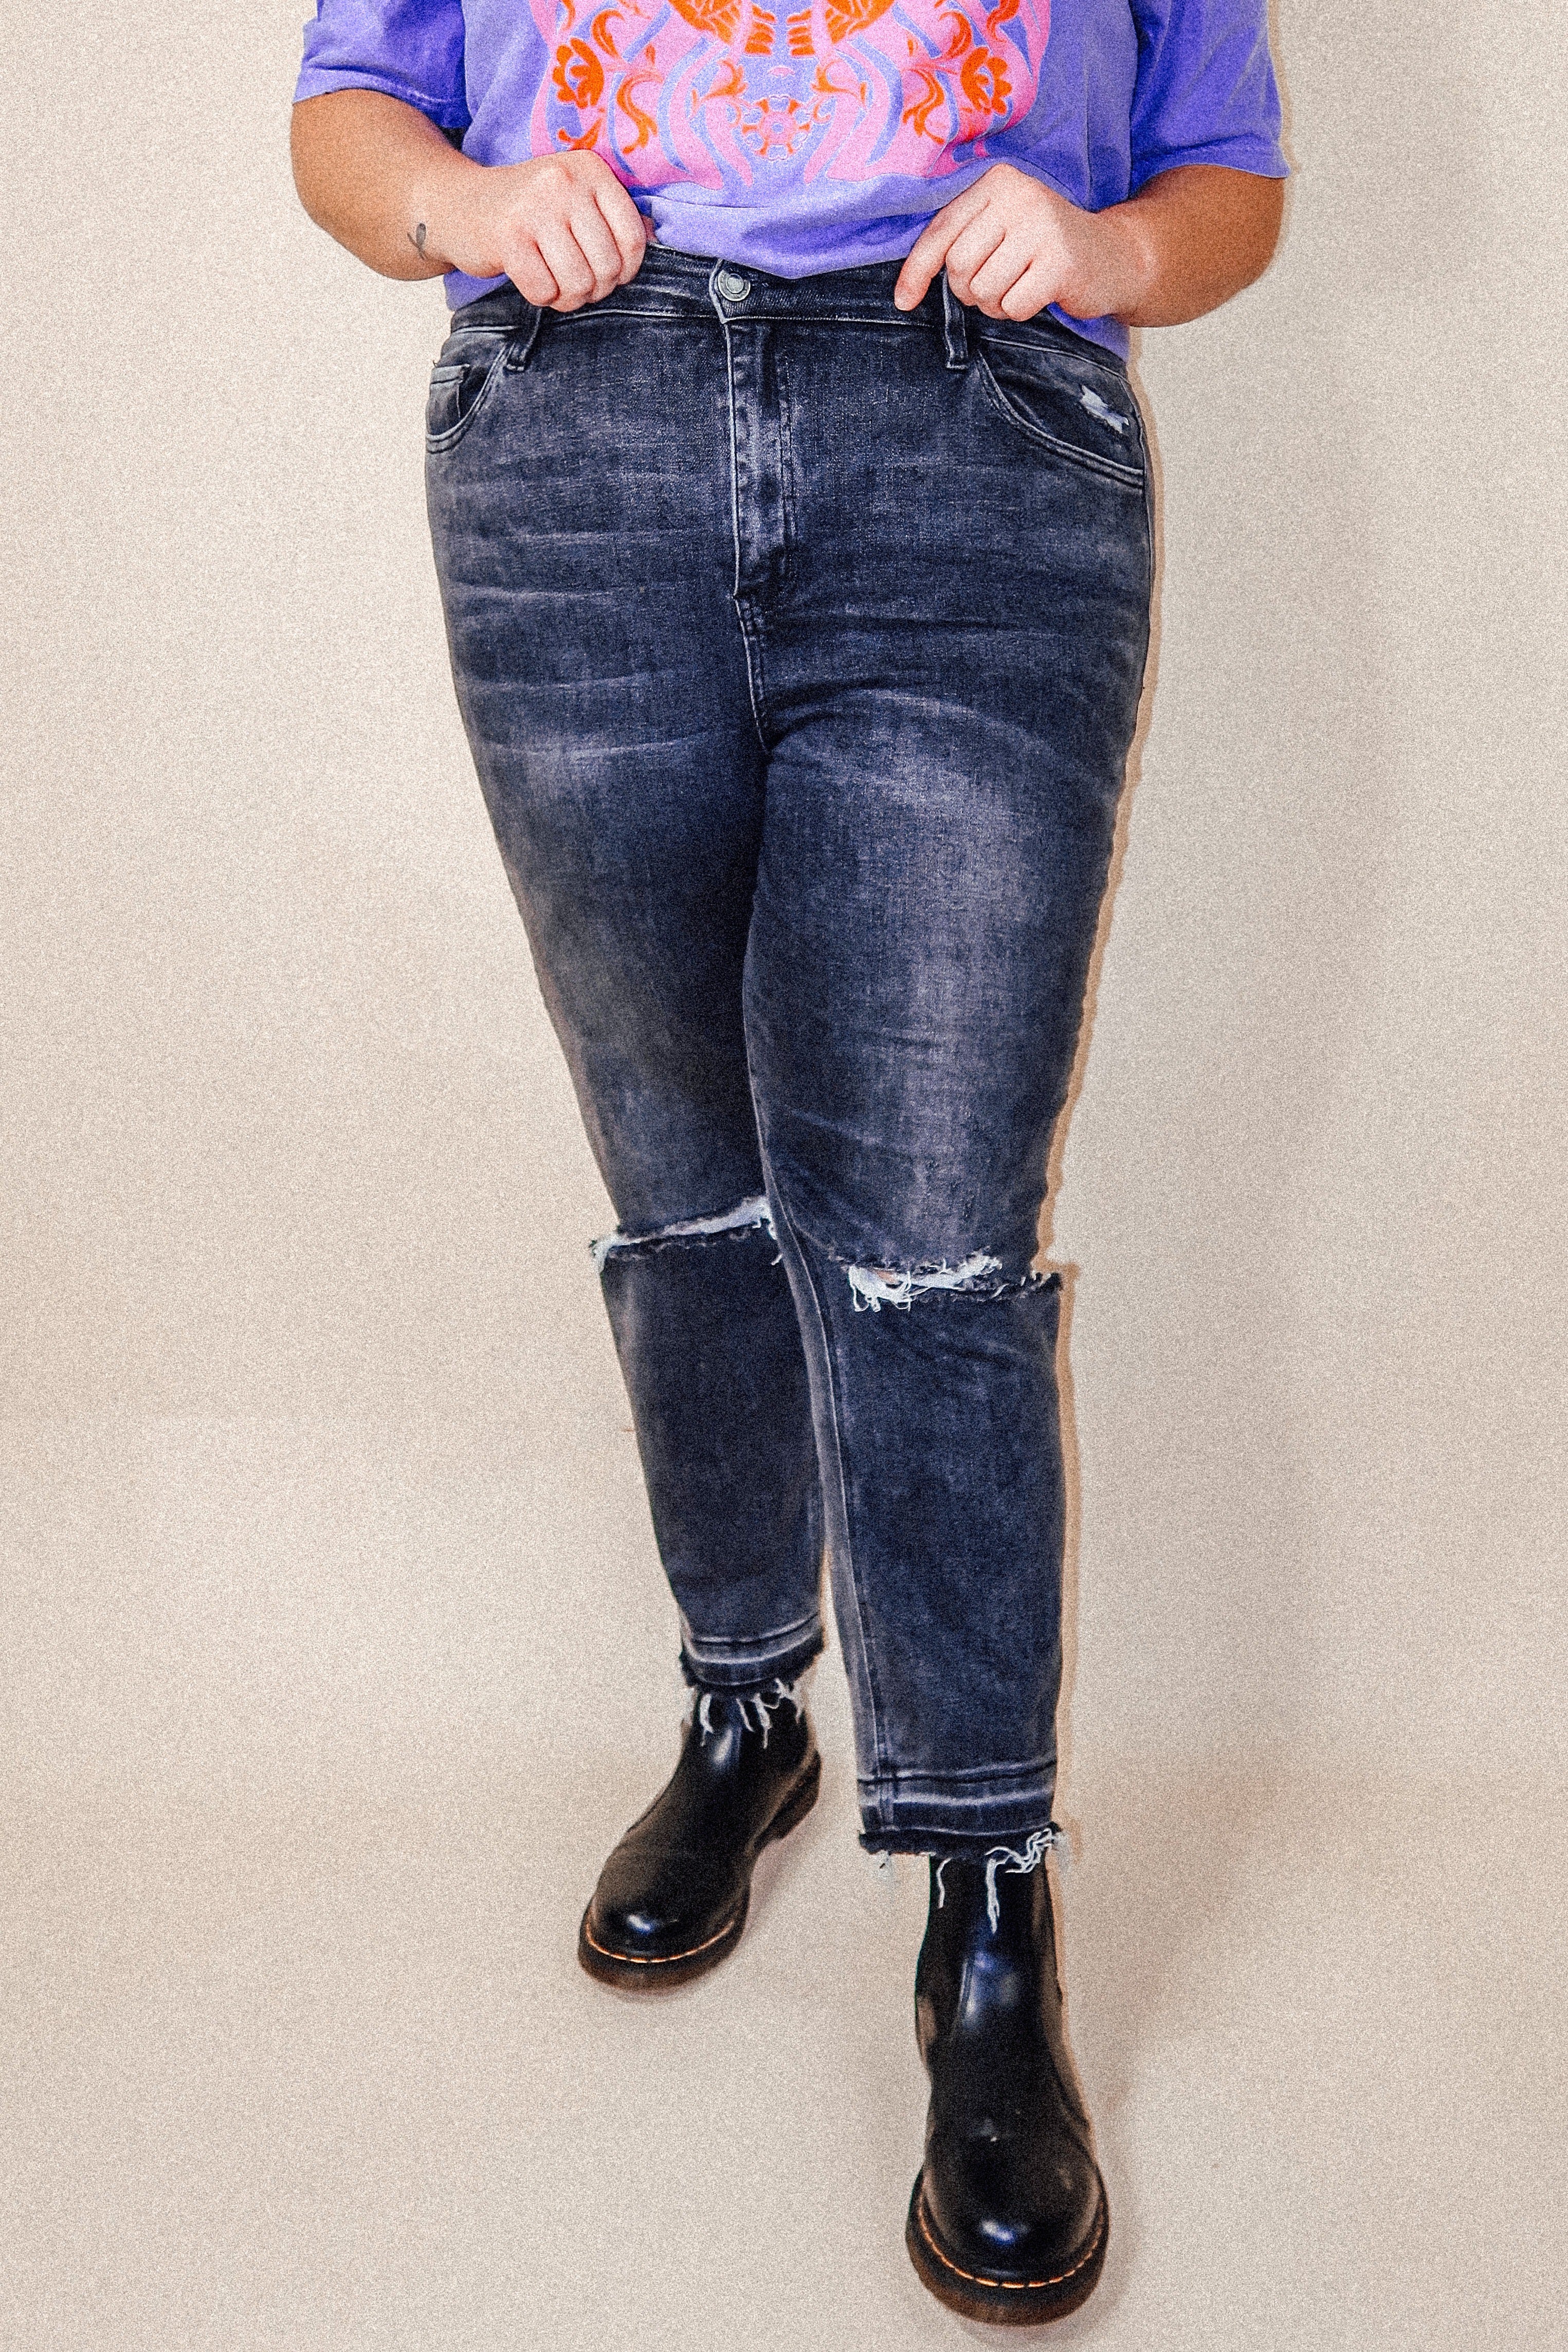 Washed Black Distressed Jeans | Curvy